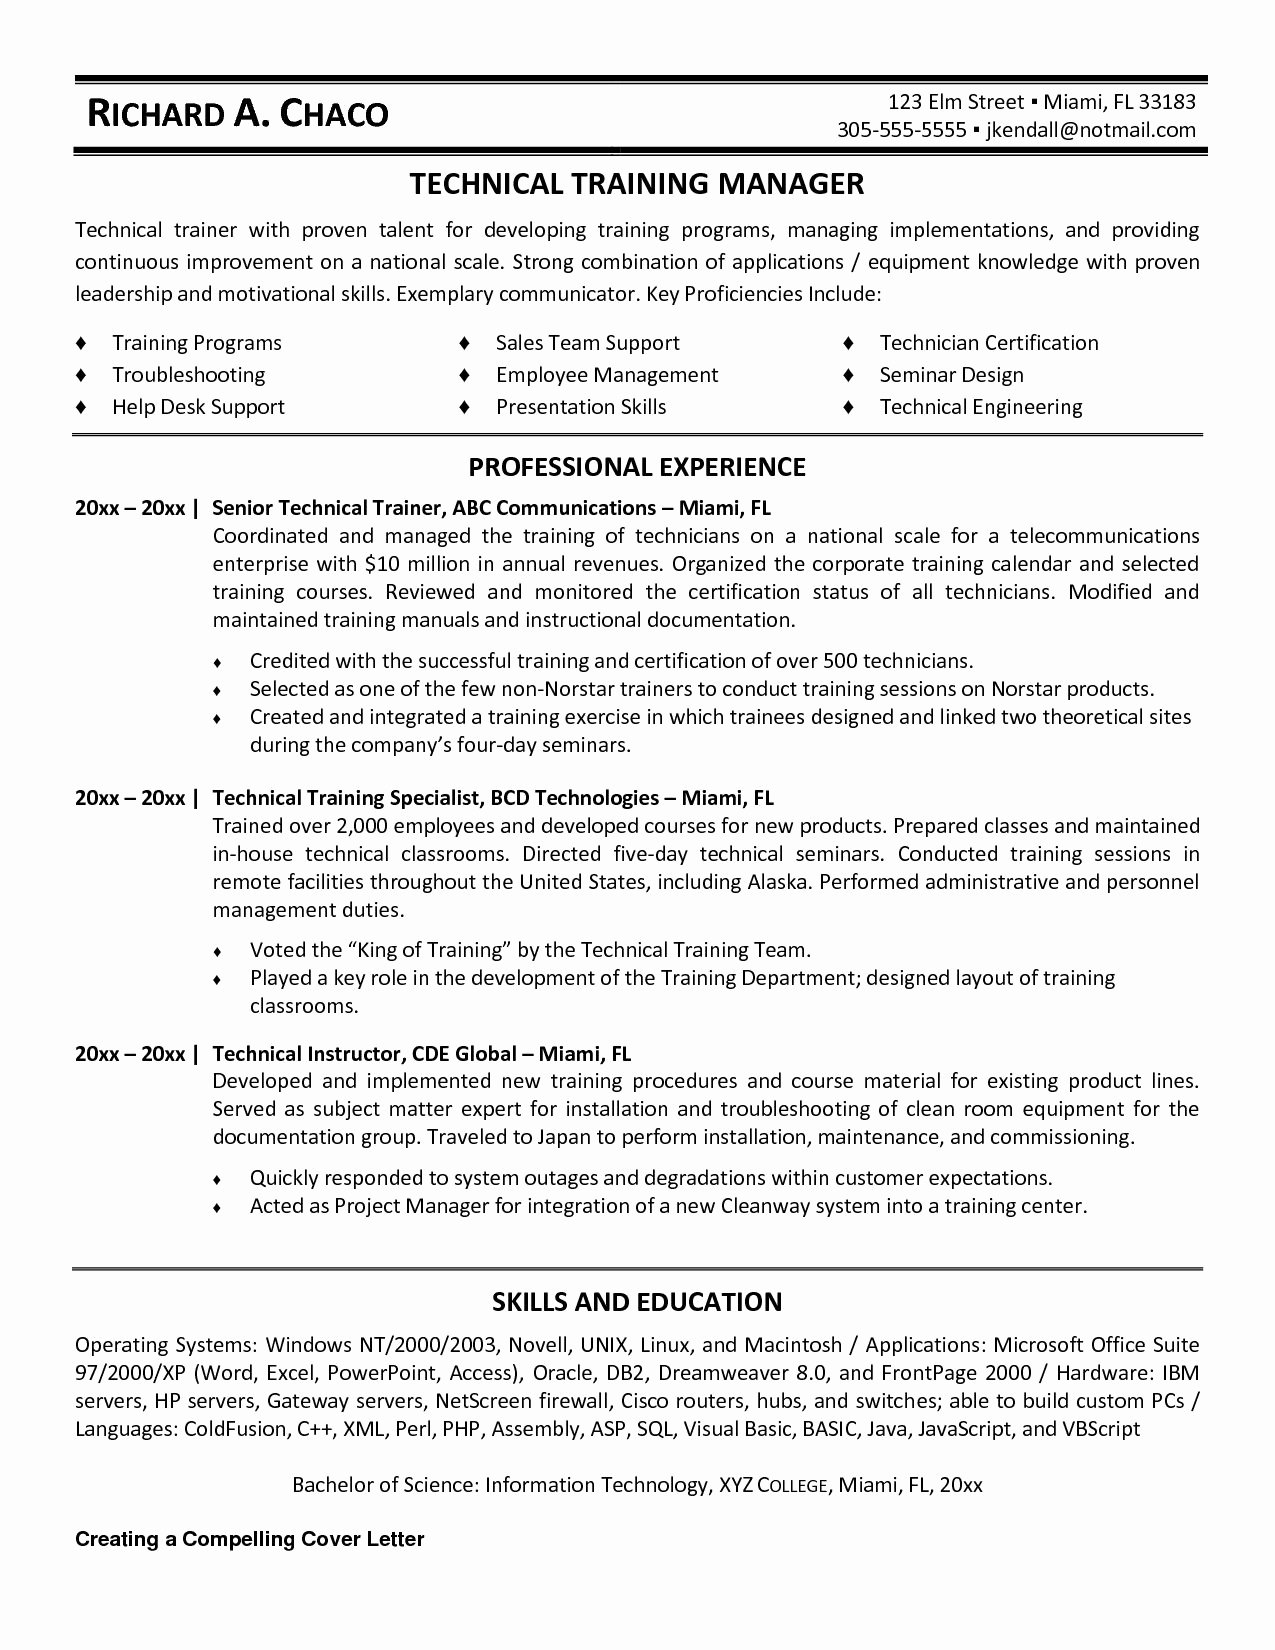 Personal Trainer Resume Template Best Of Personal Trainer Resume Objective Personal Trainer Resume